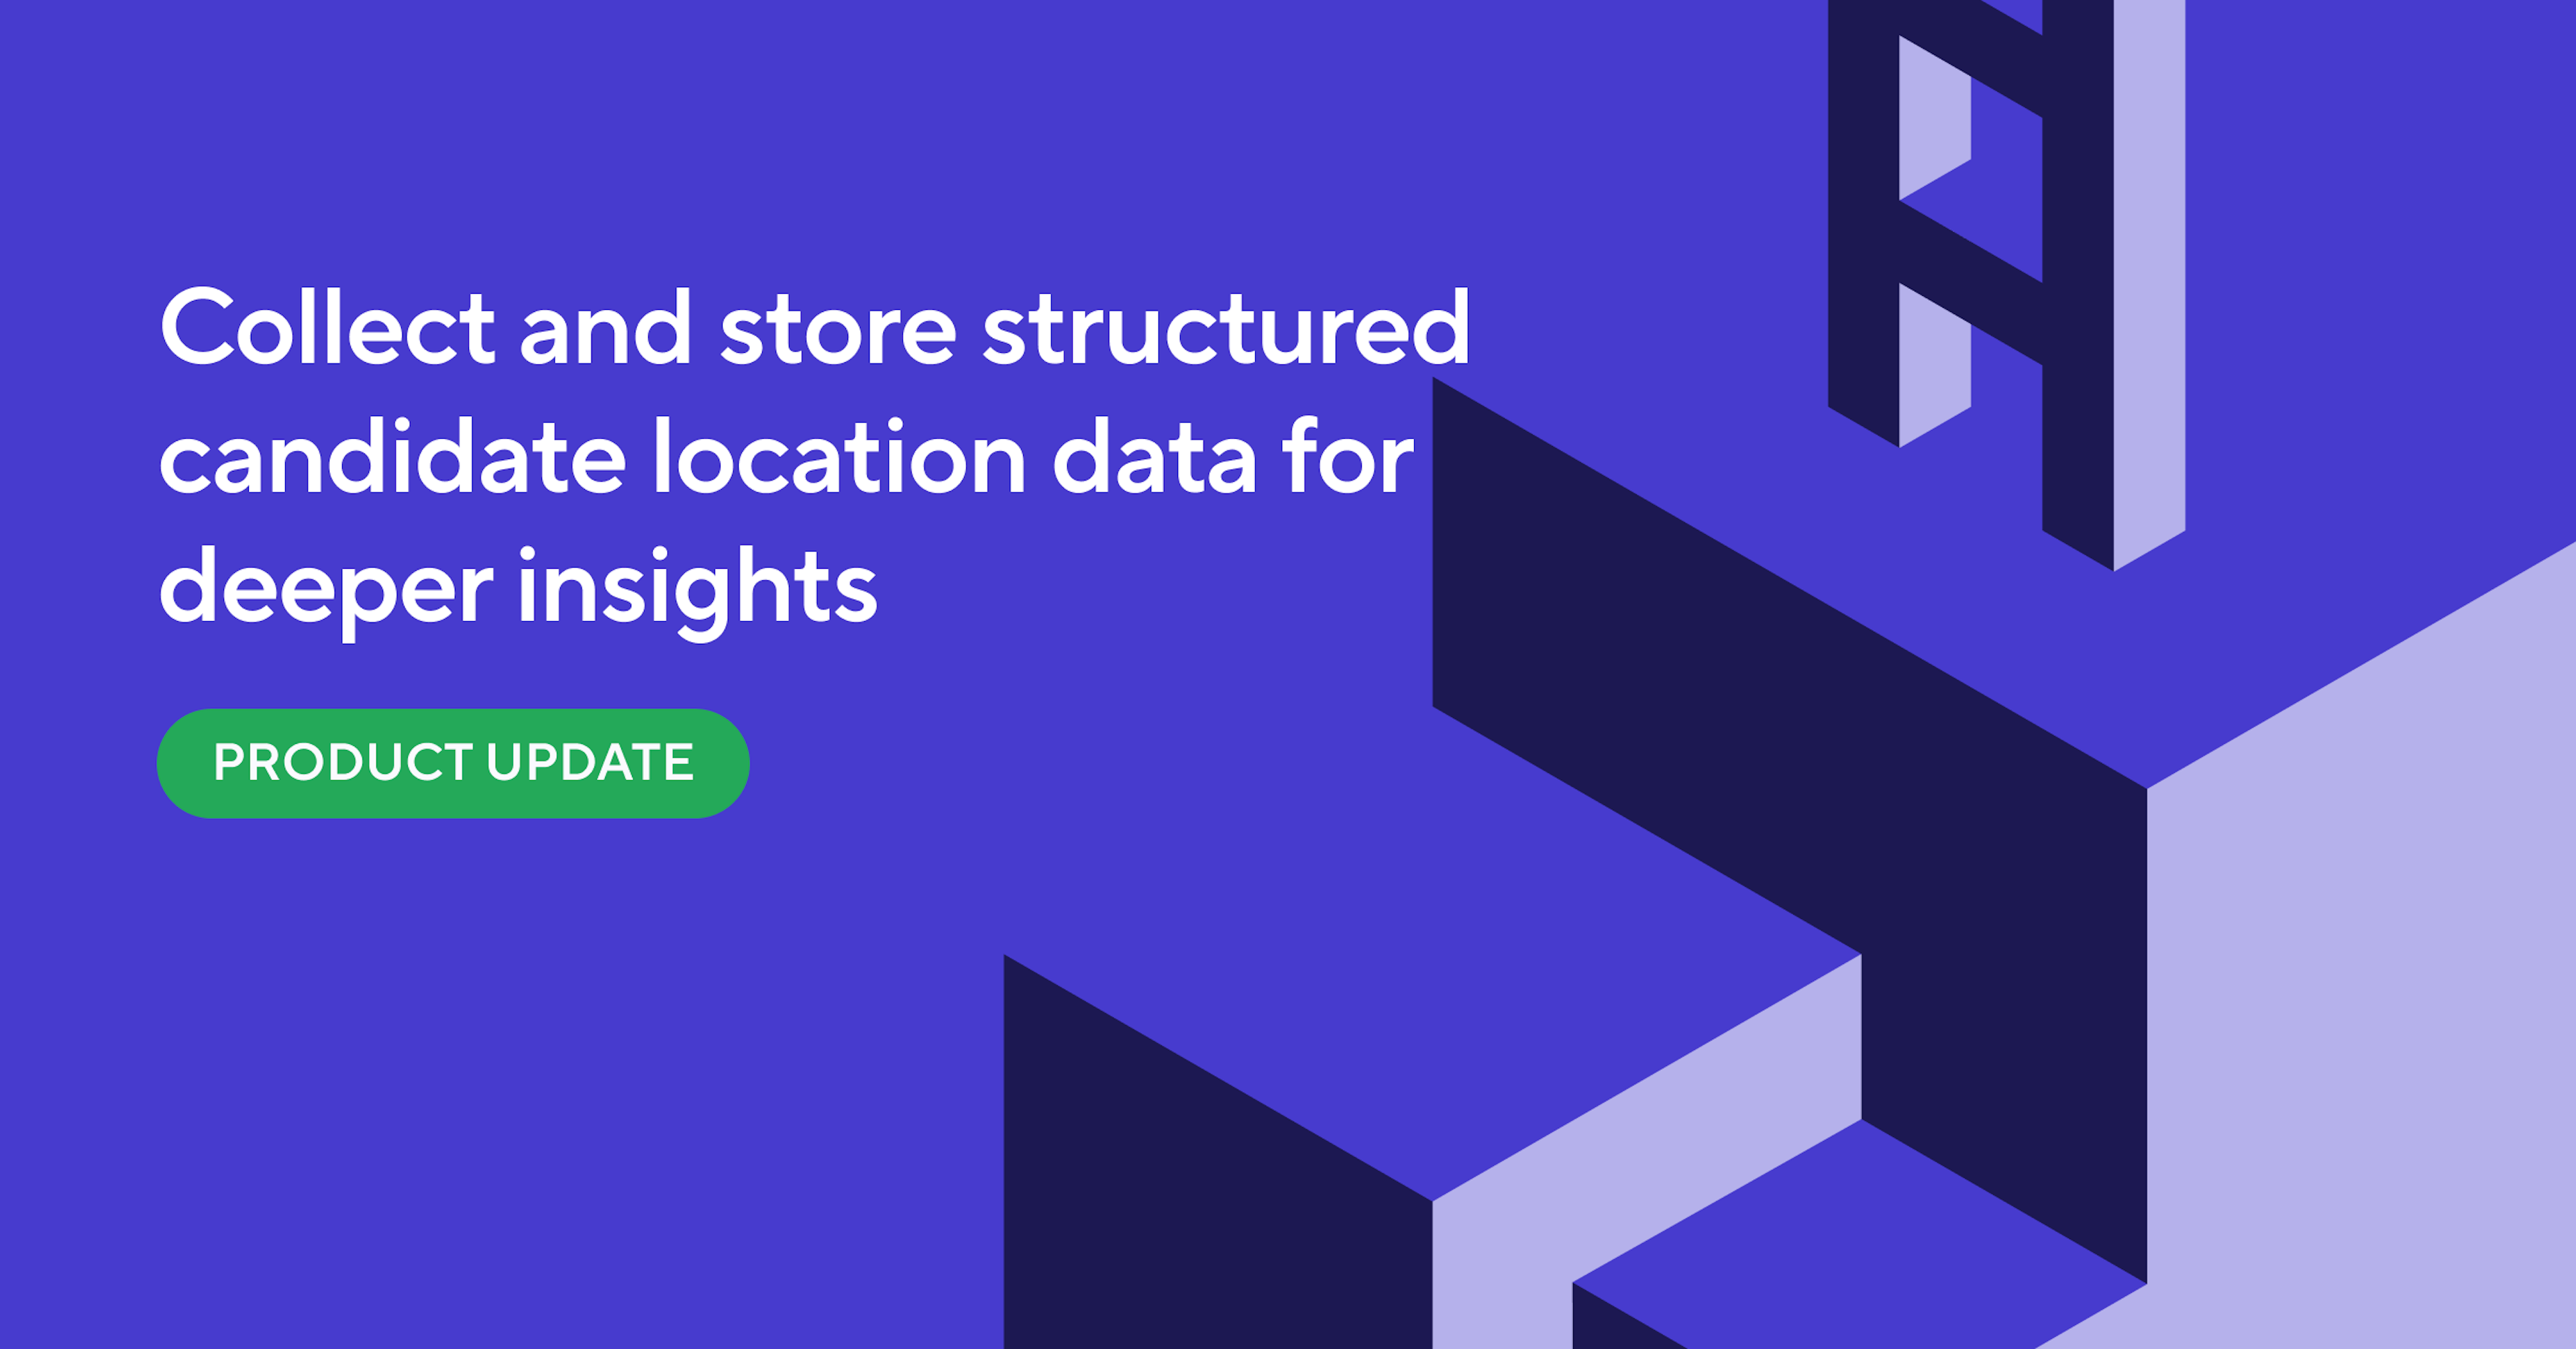 New Feature: Structured Location Data on Candidates